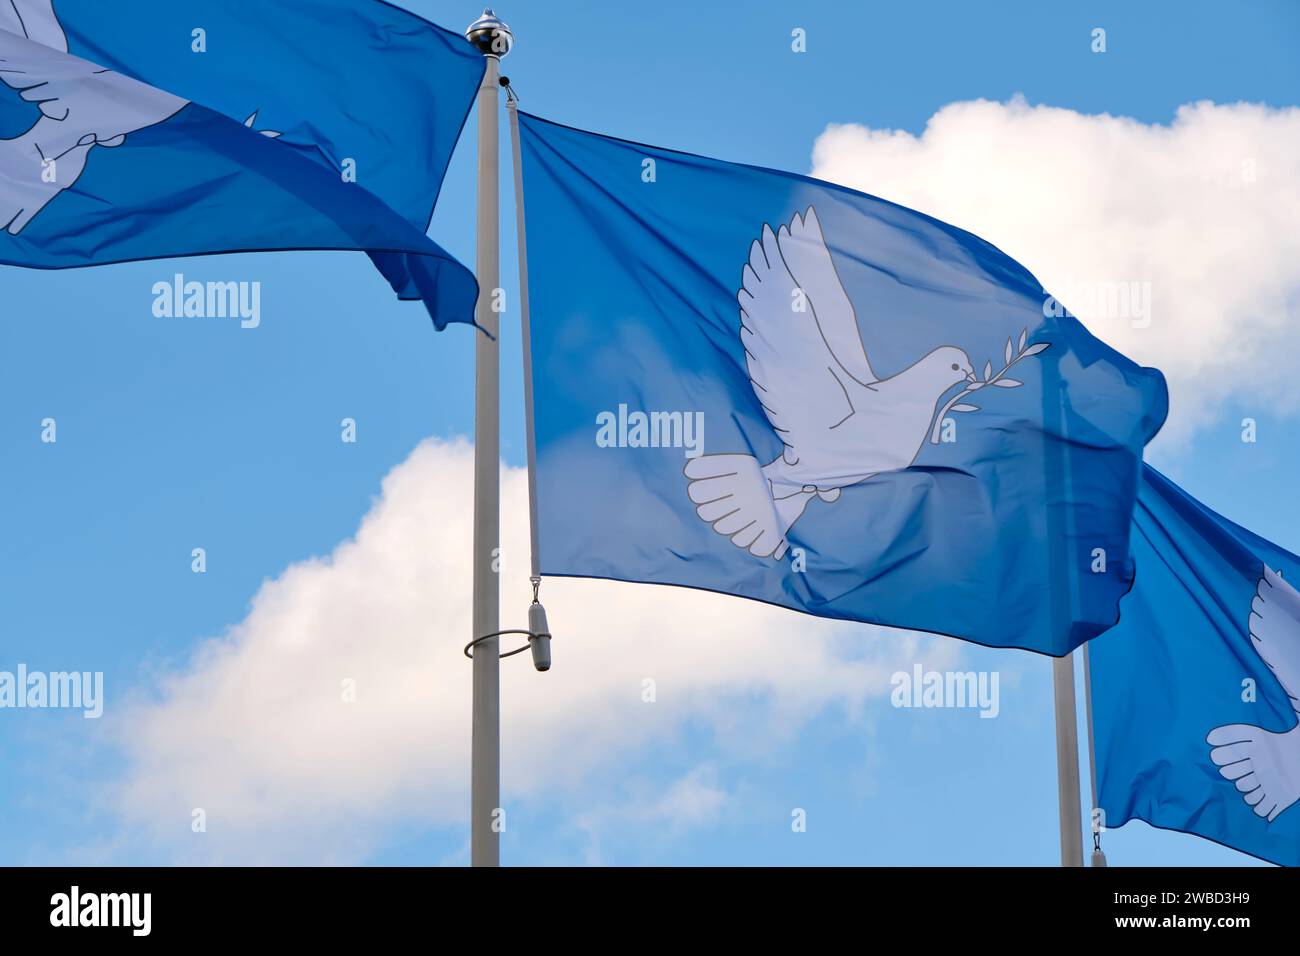 Three blue peace flags in a row printed with a dove with an olive branch in its beak. The dove with the branche is the international symbol of peace. Stock Photo